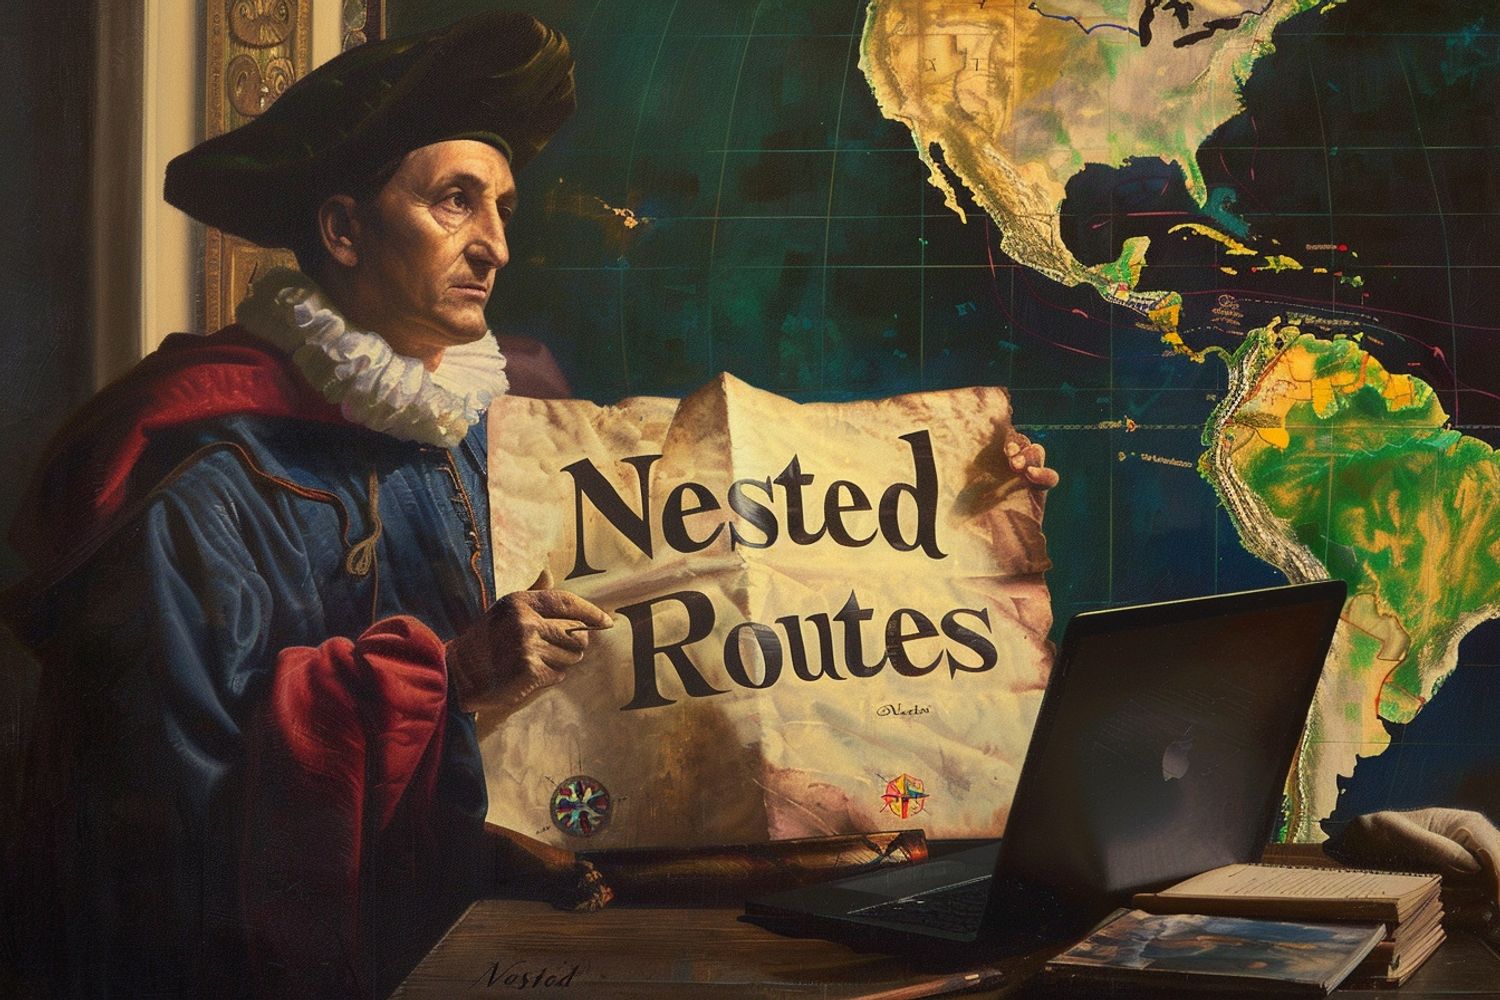 Christopher Columbus holding a world map with large text "Nested Routes", a Macbook on the table beside him, bright oil painting by Michelangelo